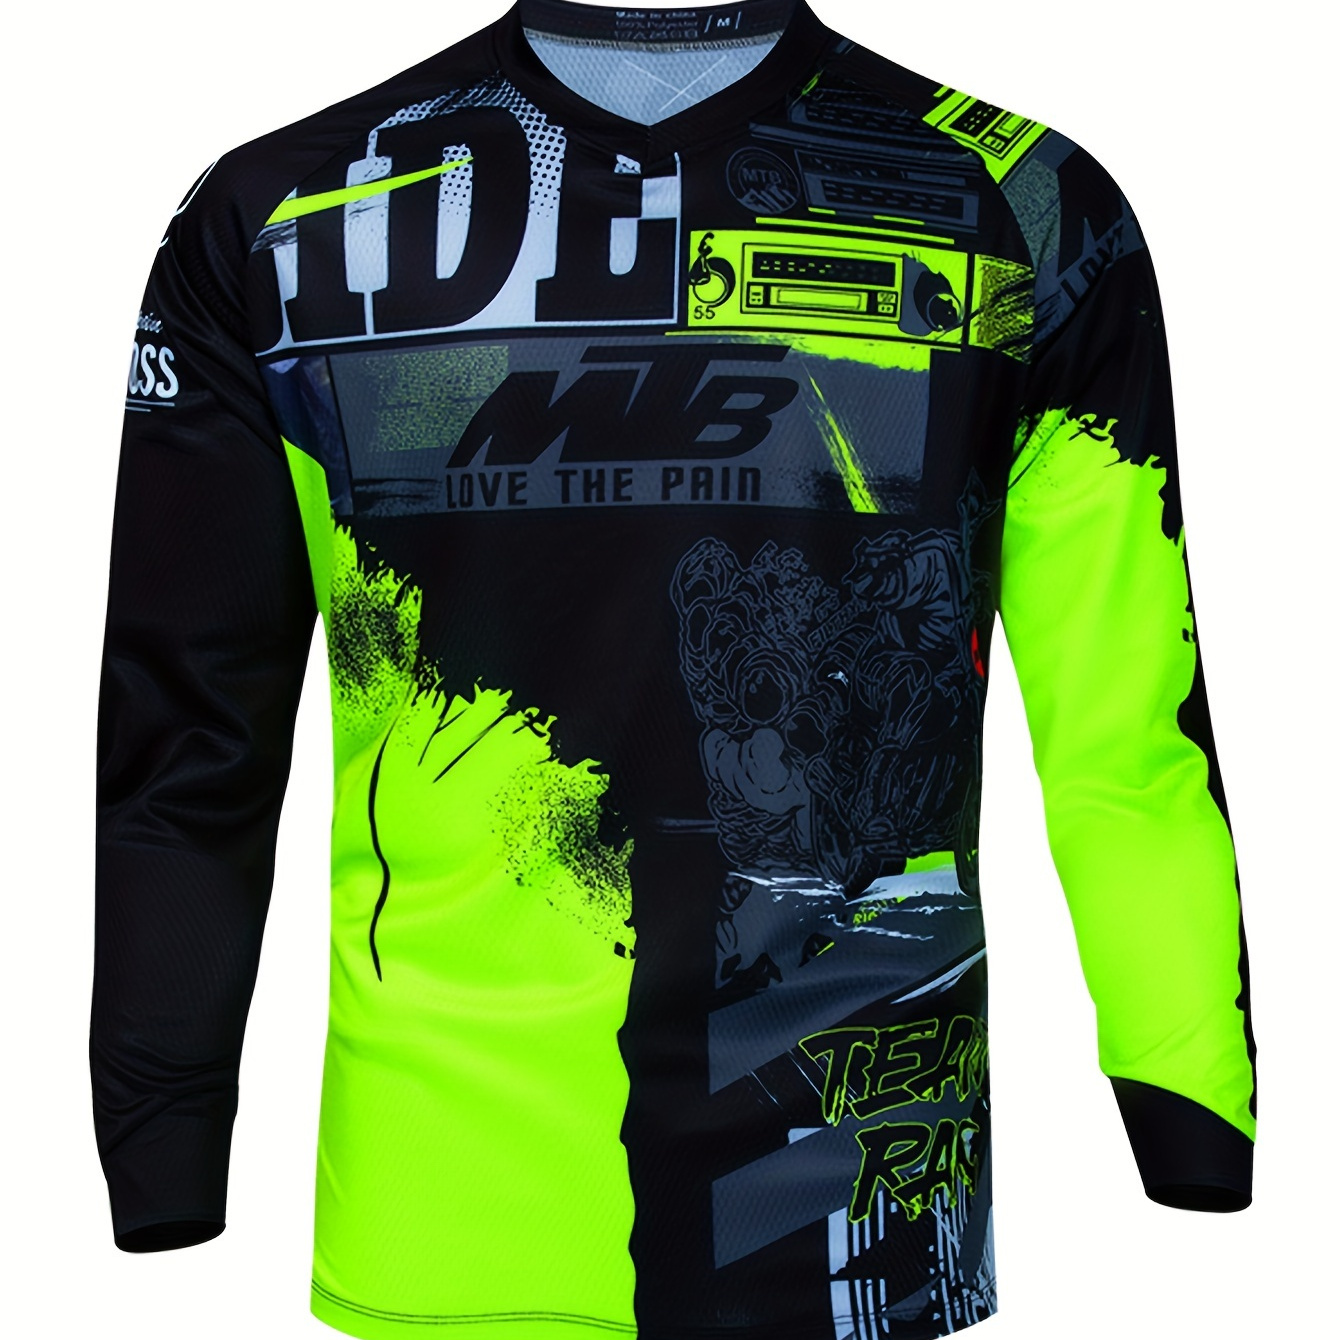 

Men's Cycling Jersey, Quick Dry, Moisture Wicking, Breathable Long Sleeves Mtb Mountain Bike Shirt For Biking & Riding Sports